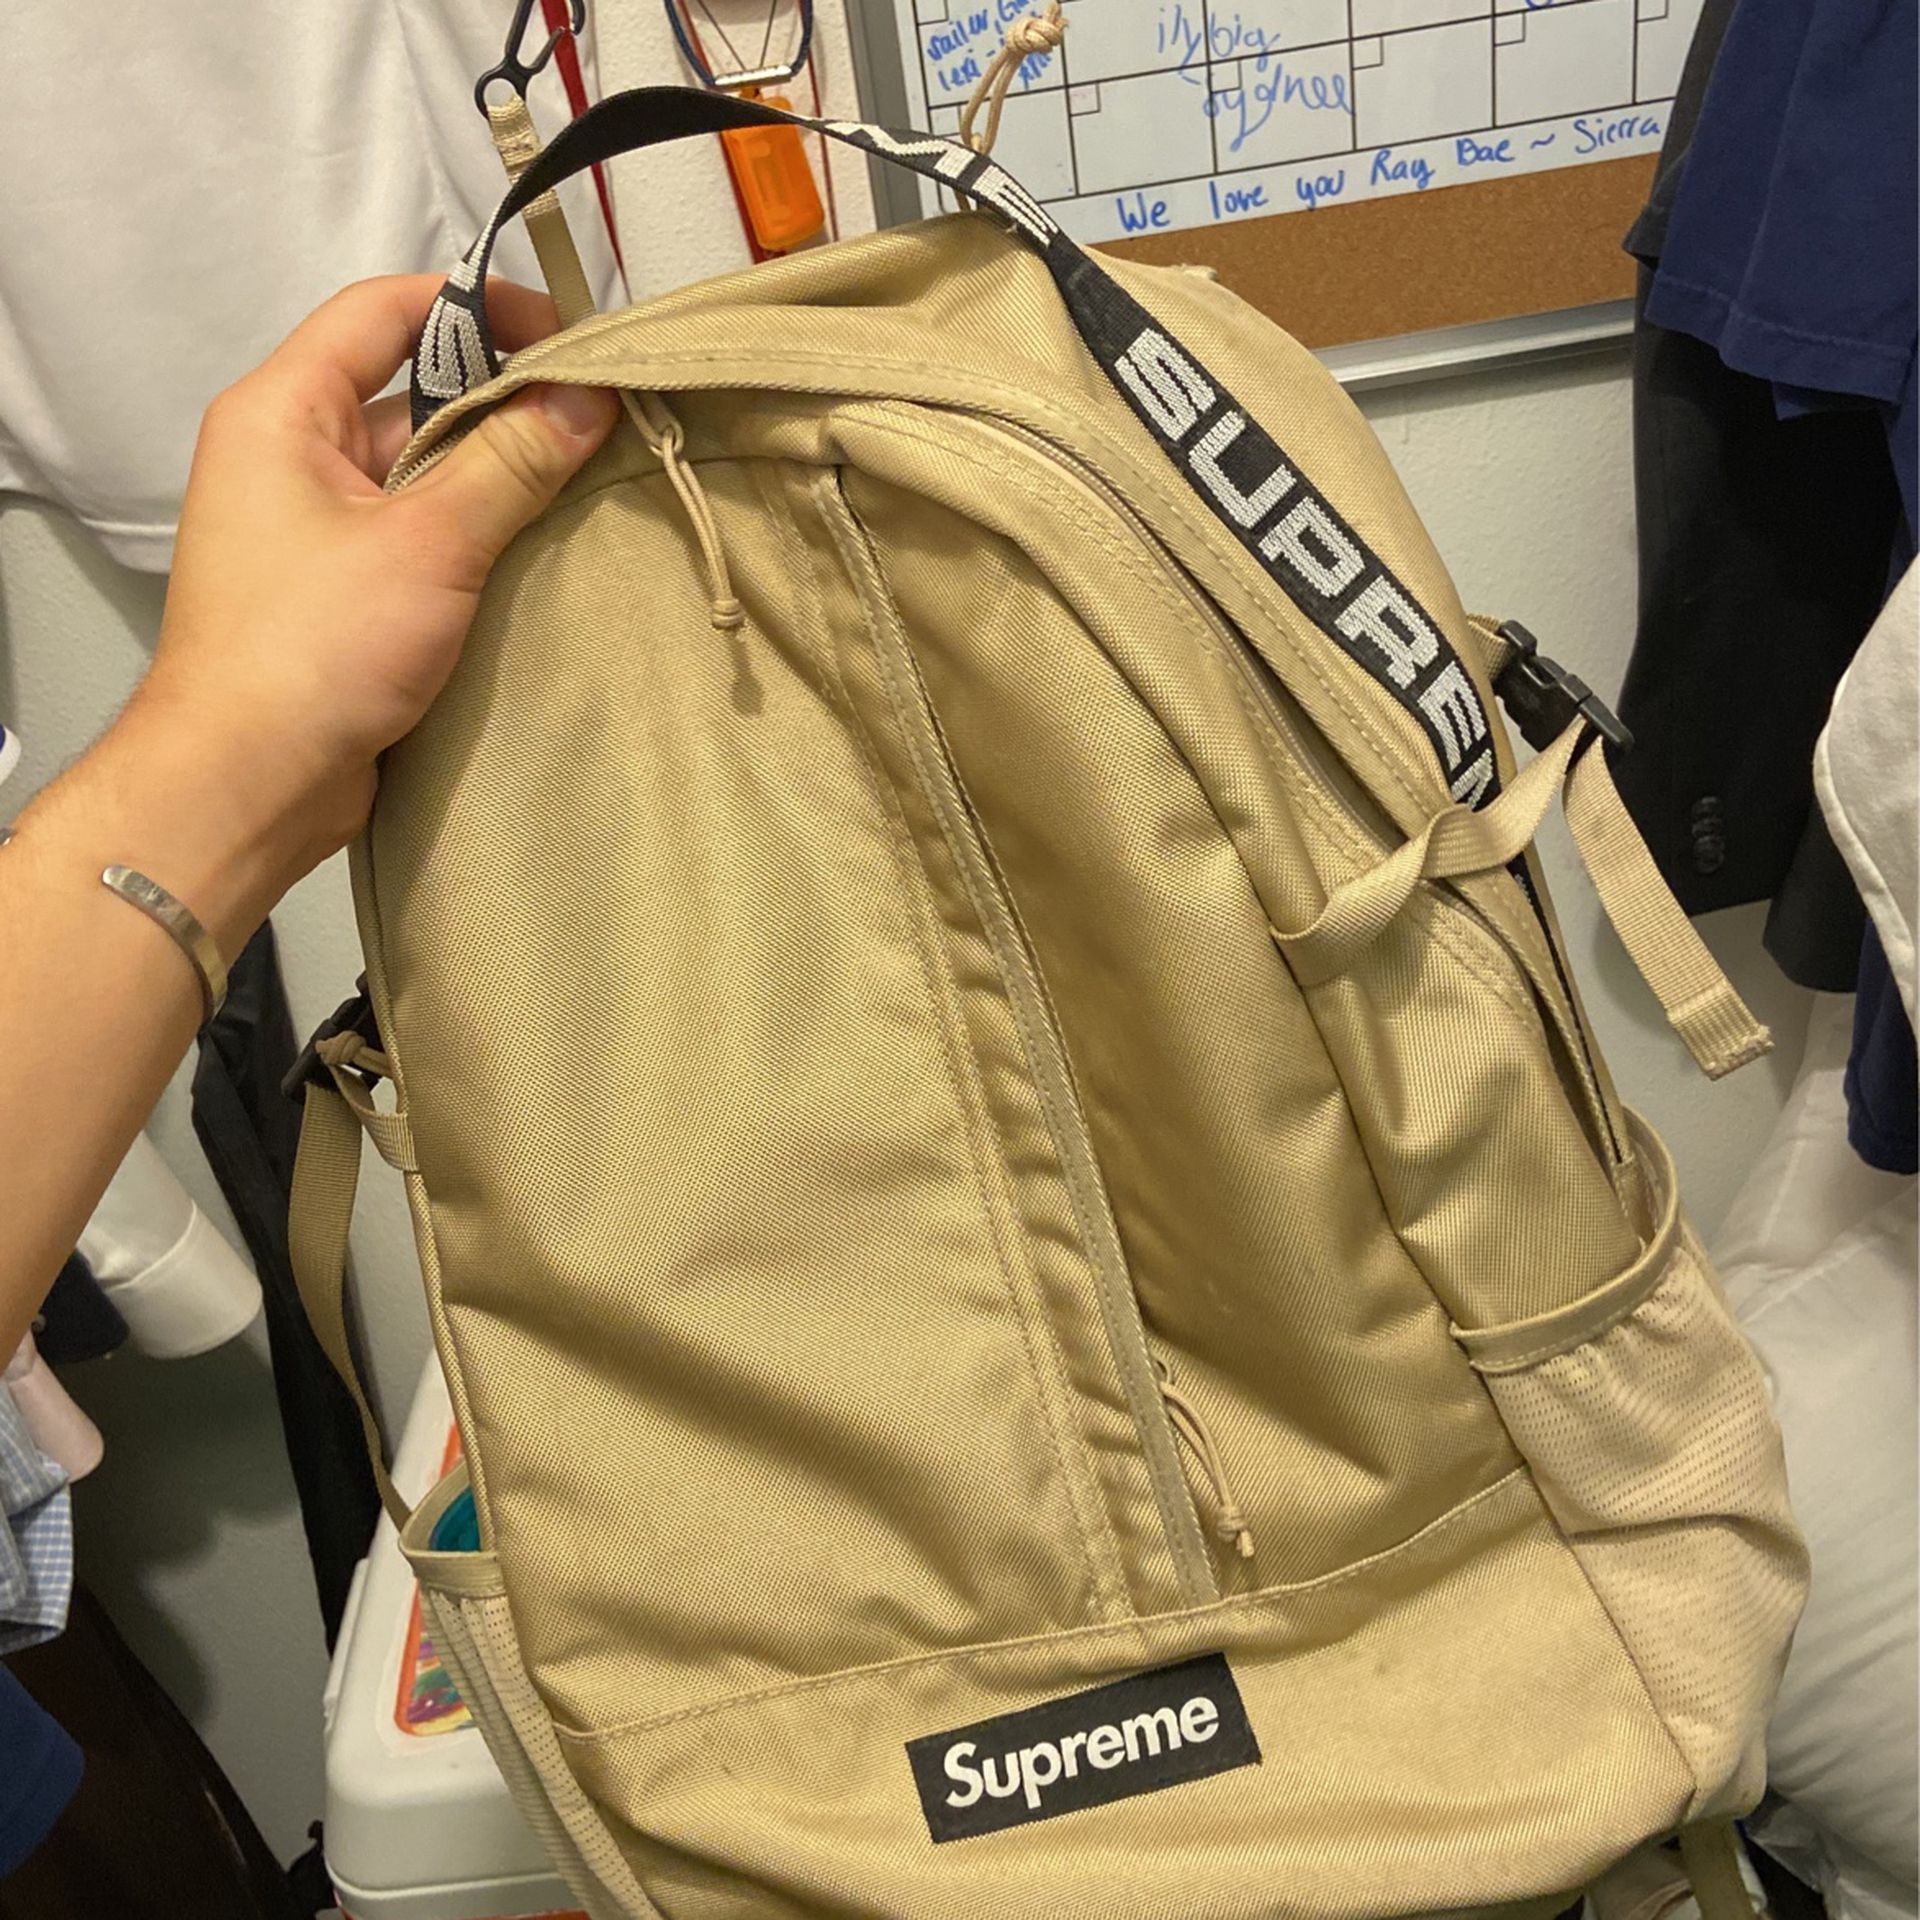 supreme tan bag for Sale in Guadalupe, AZ - OfferUp